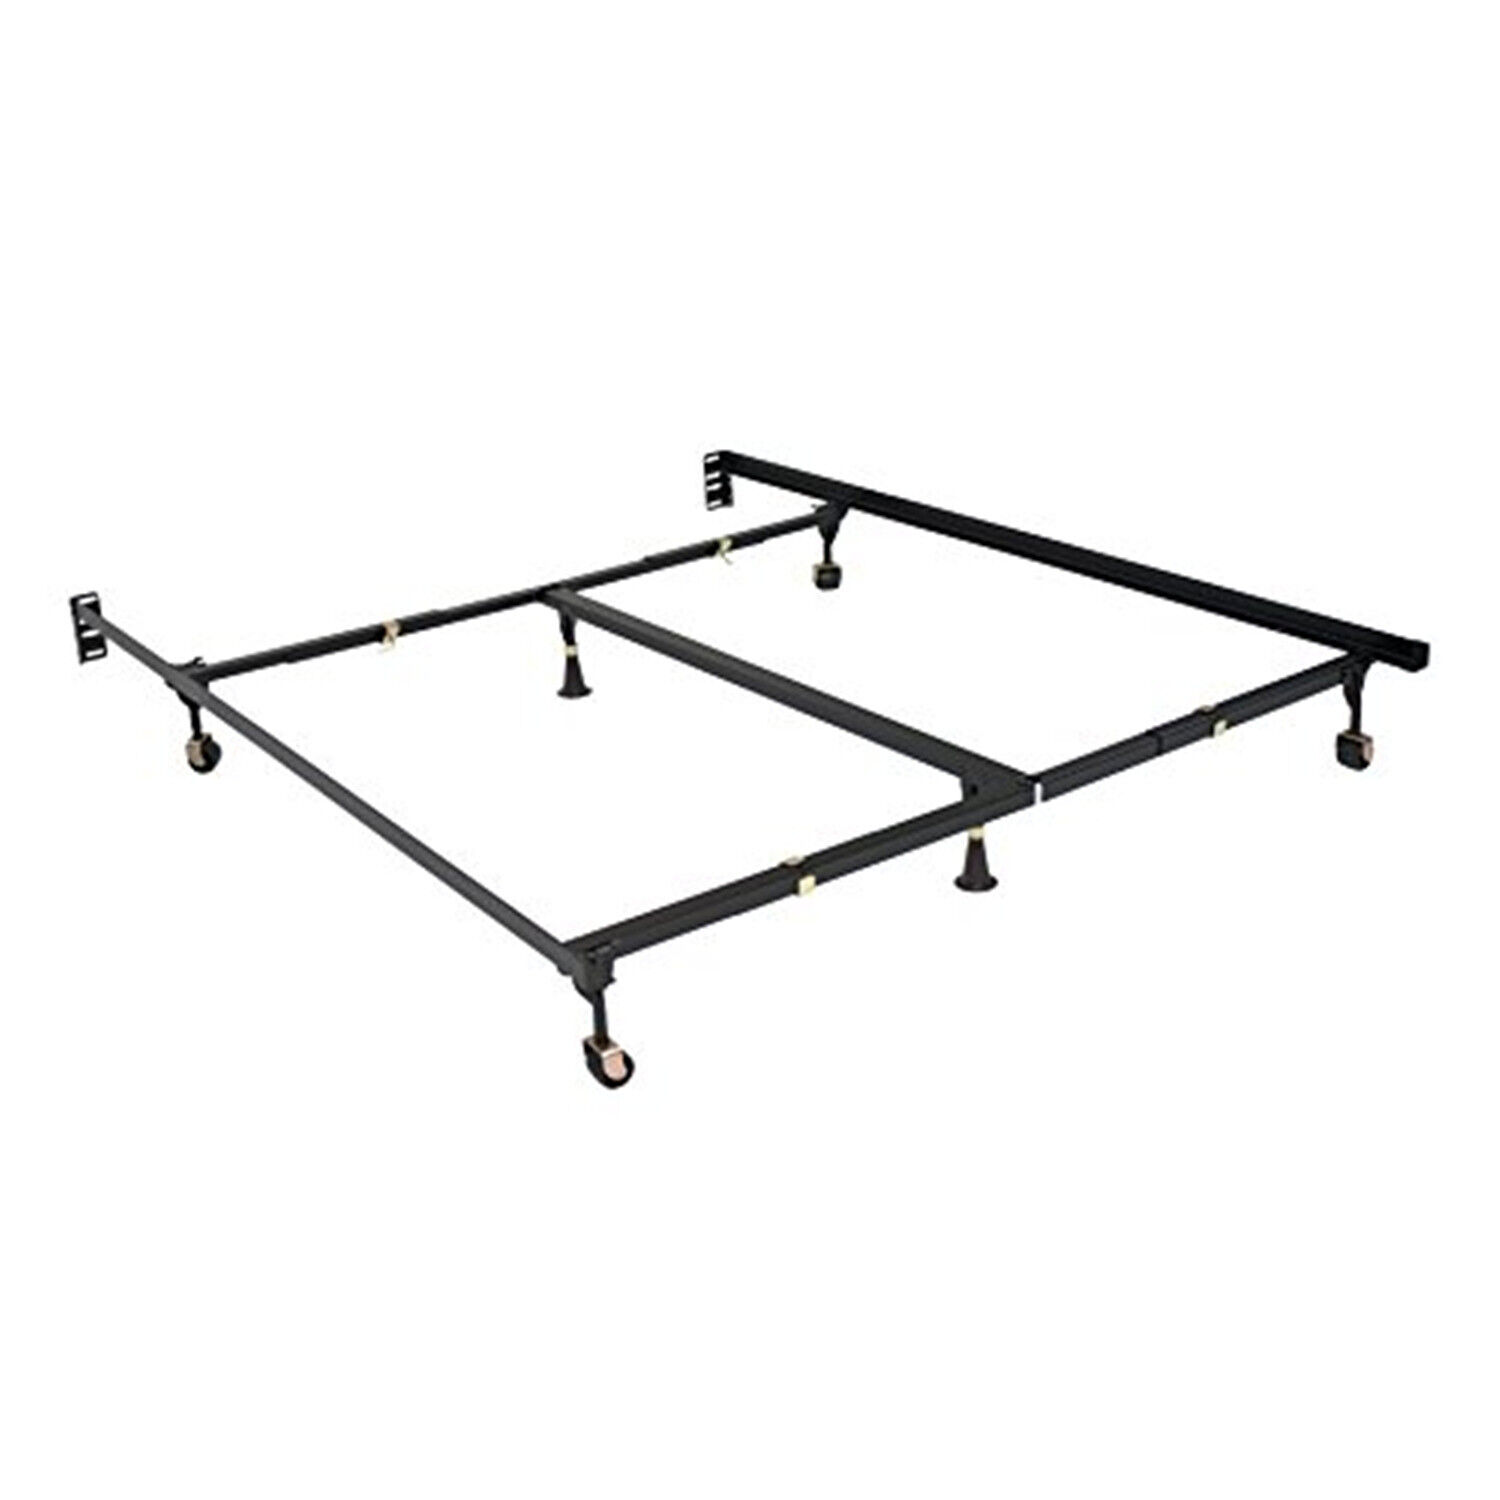 Serta Stabl-base Premium Elite Clamp Style  Bed Frame Twin/full/queen/cal King/e